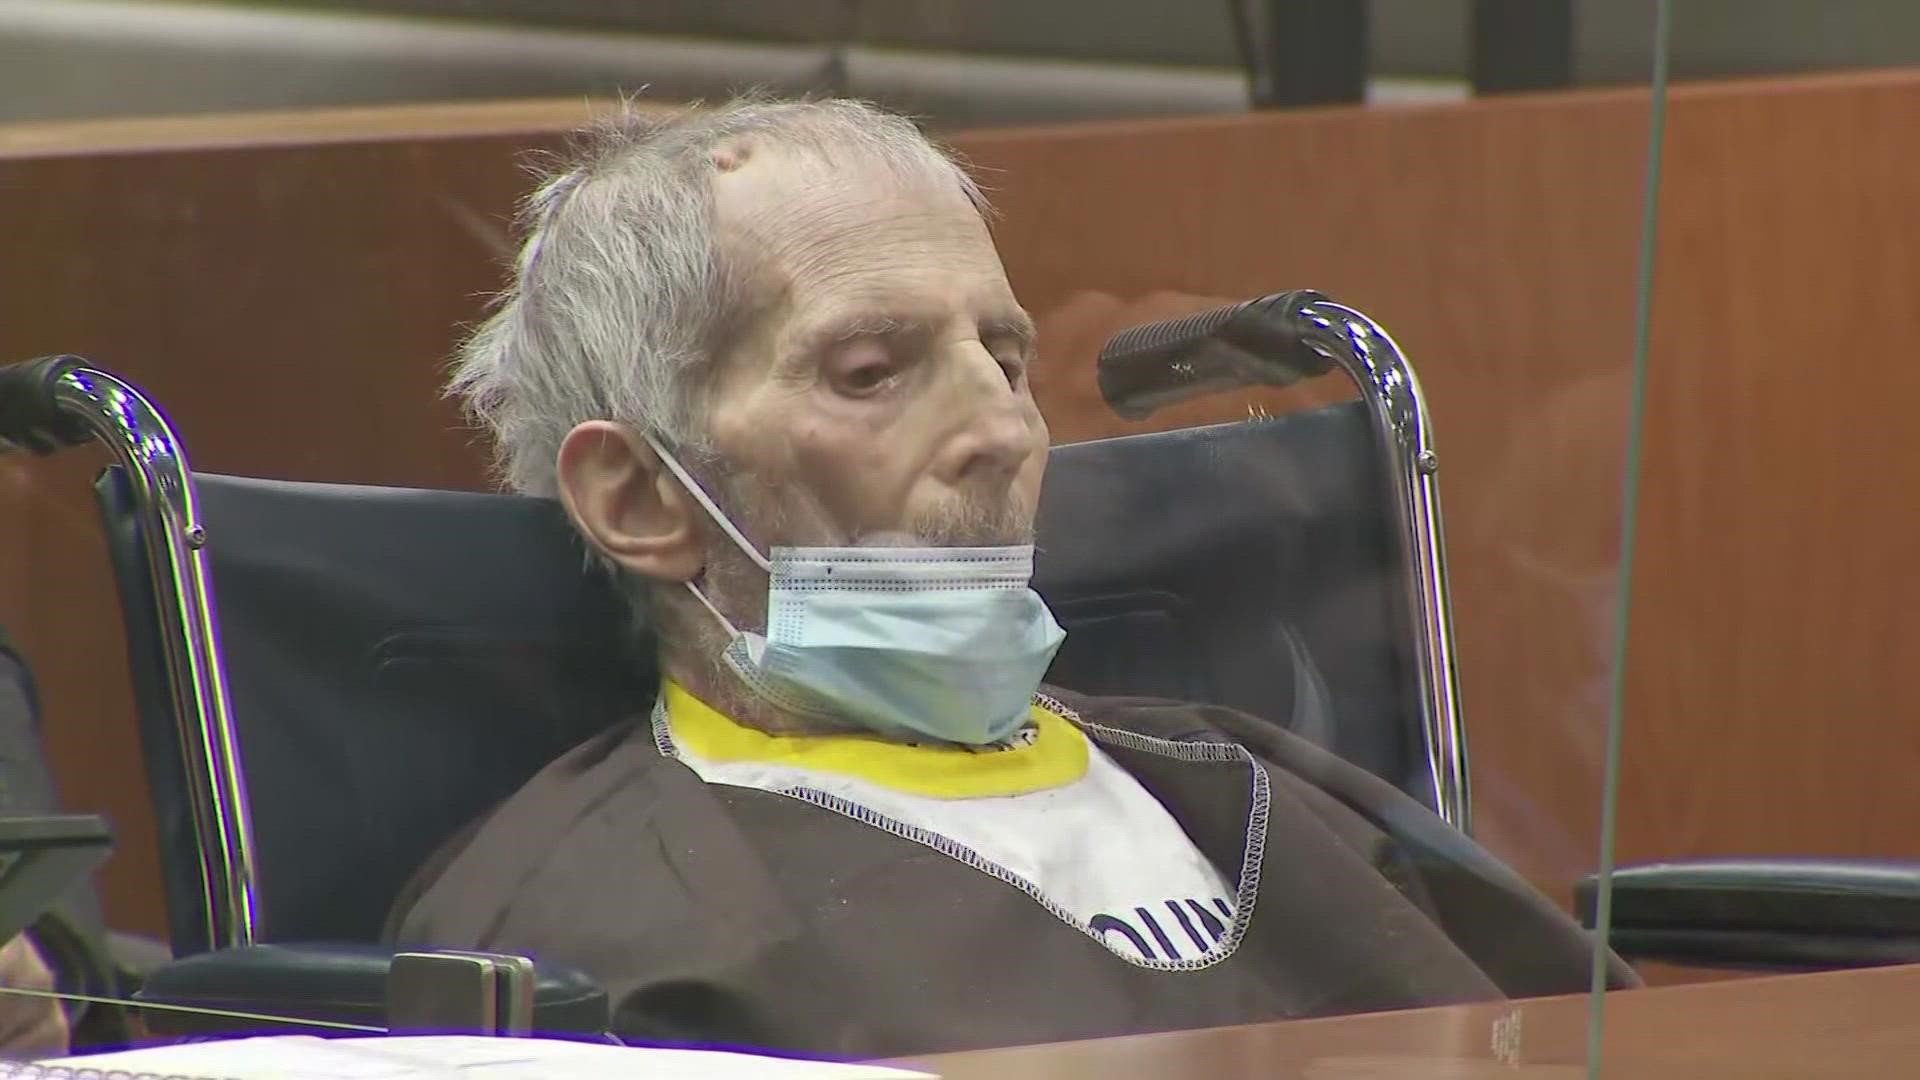 New York real estate heir Robert Durst was sentenced to life in California prison without parole for first-degree murder of his best friend, Susan Berman.